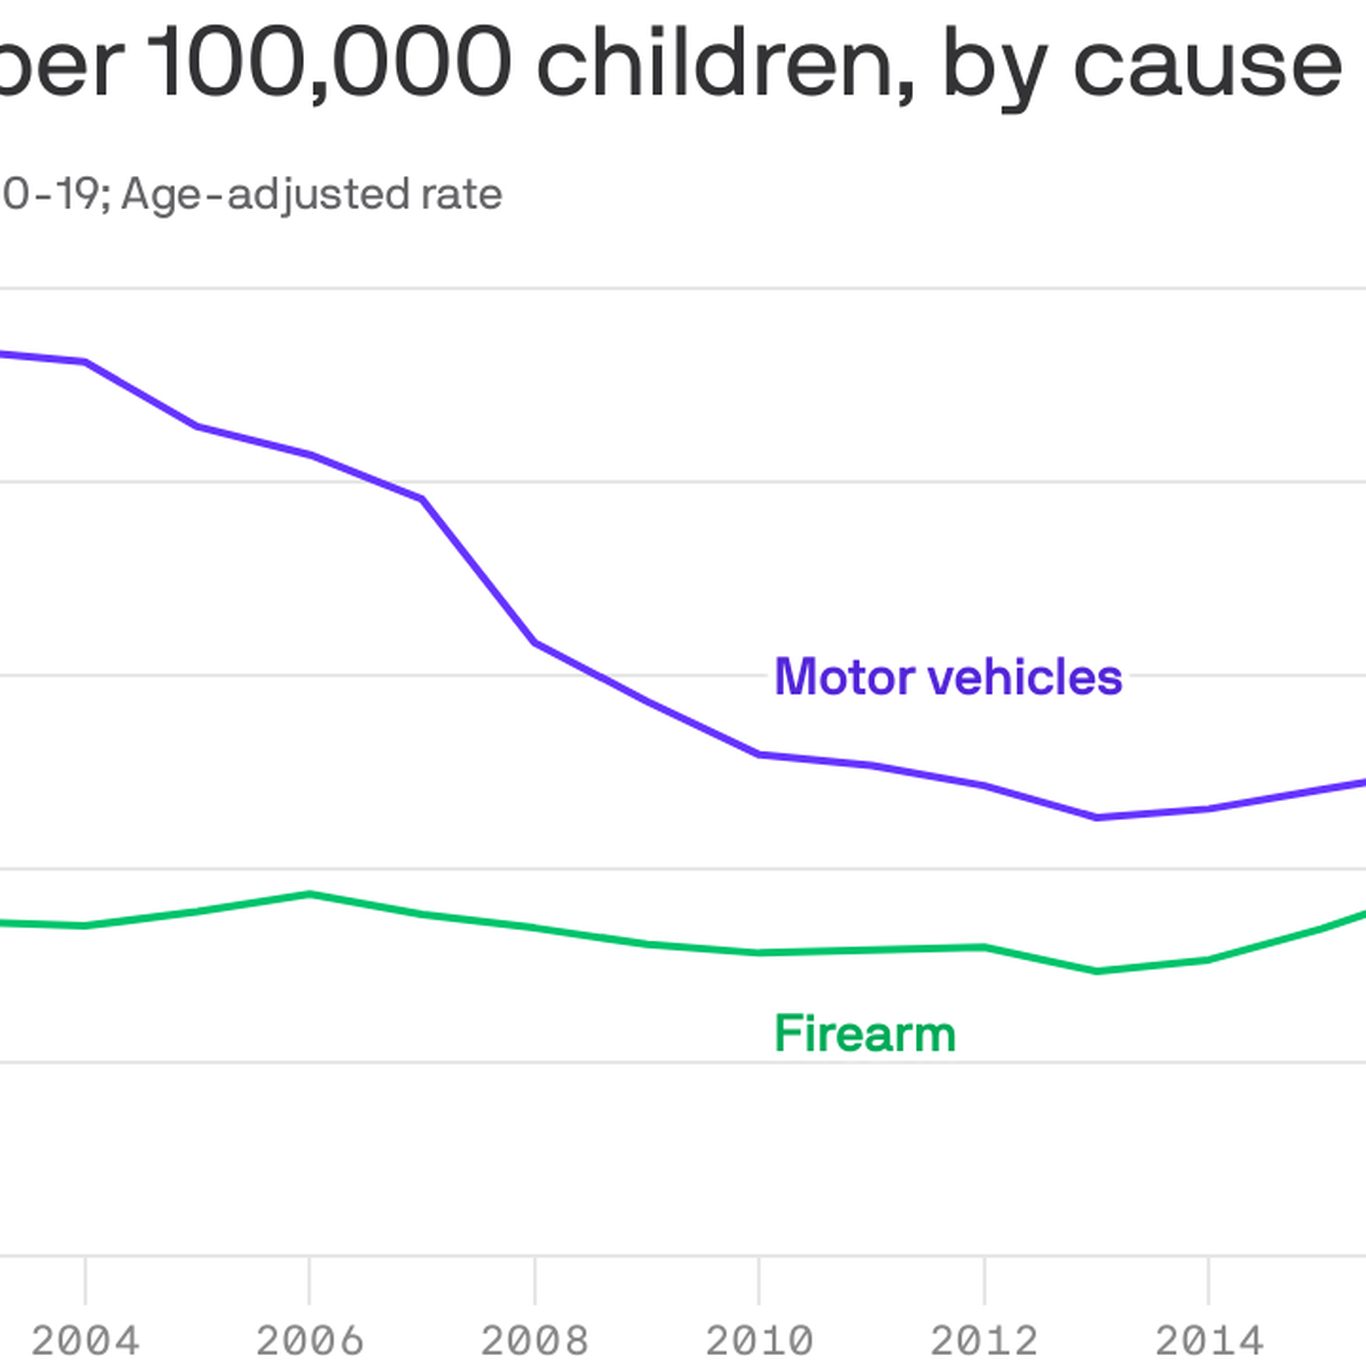 Firearms kill more children than car crashes, new CDC report finds